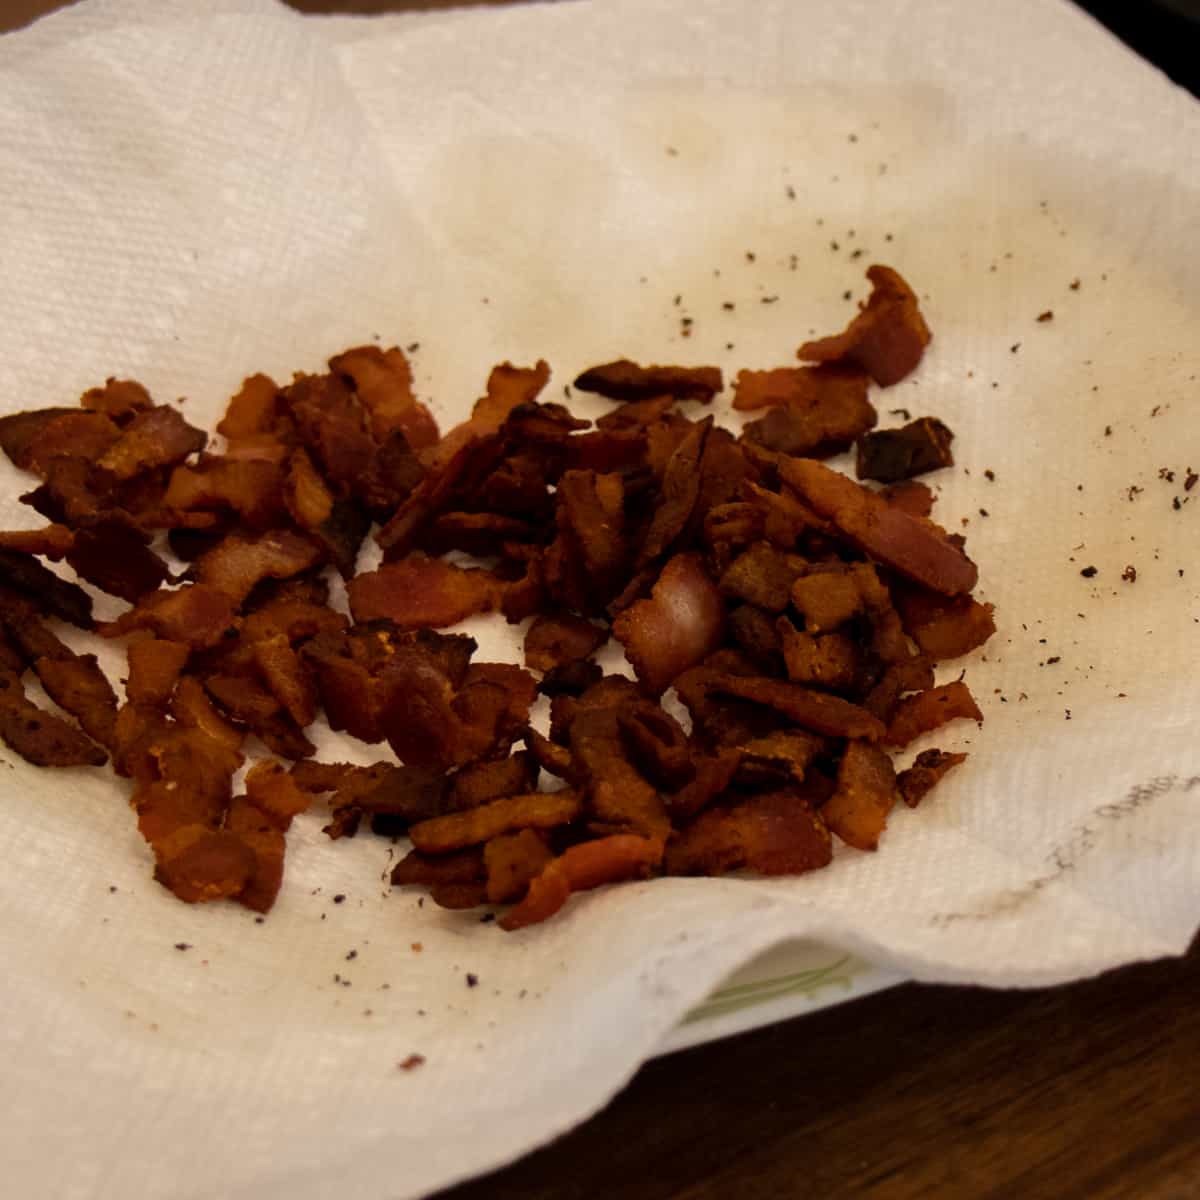 Fried bacon draining on a paper towel.